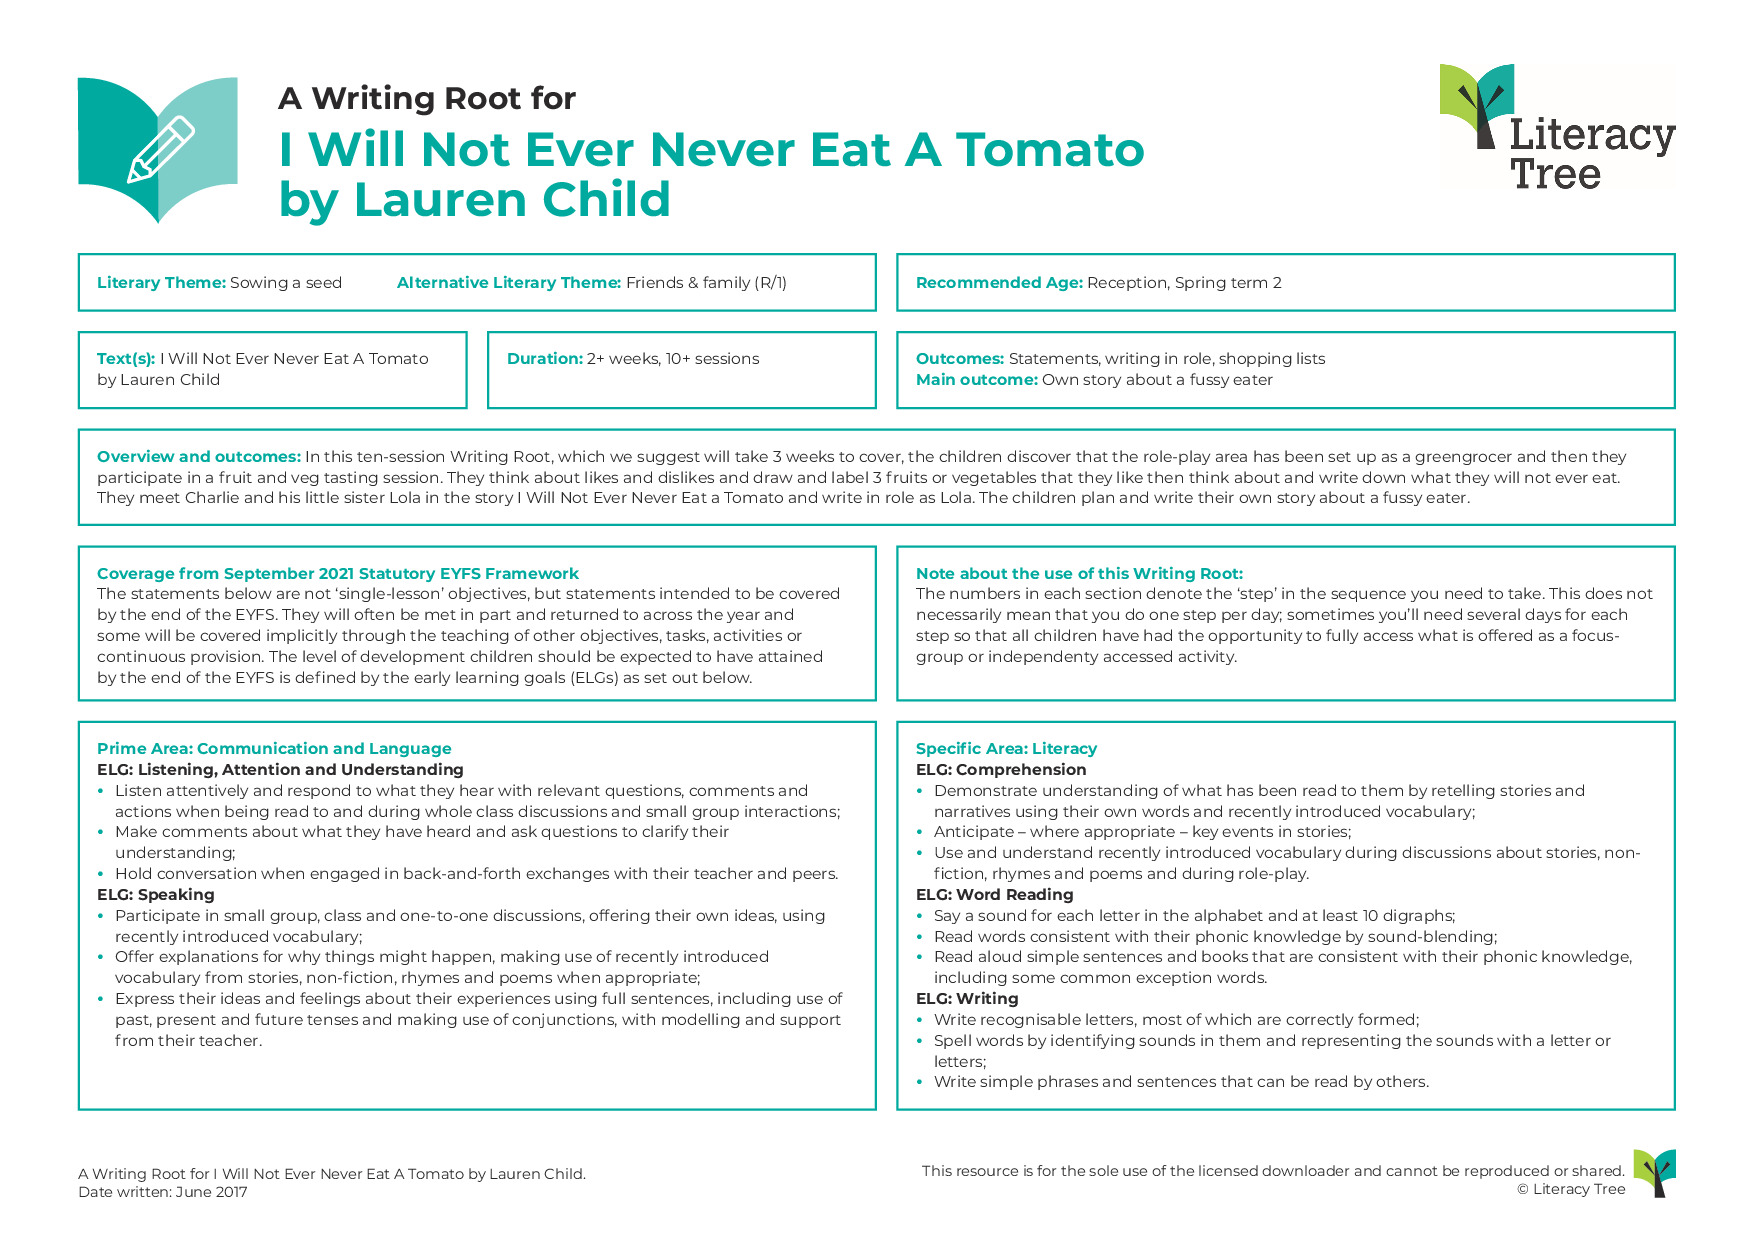 A Writing Root for I Will Not Ever Never Eat A Tomato